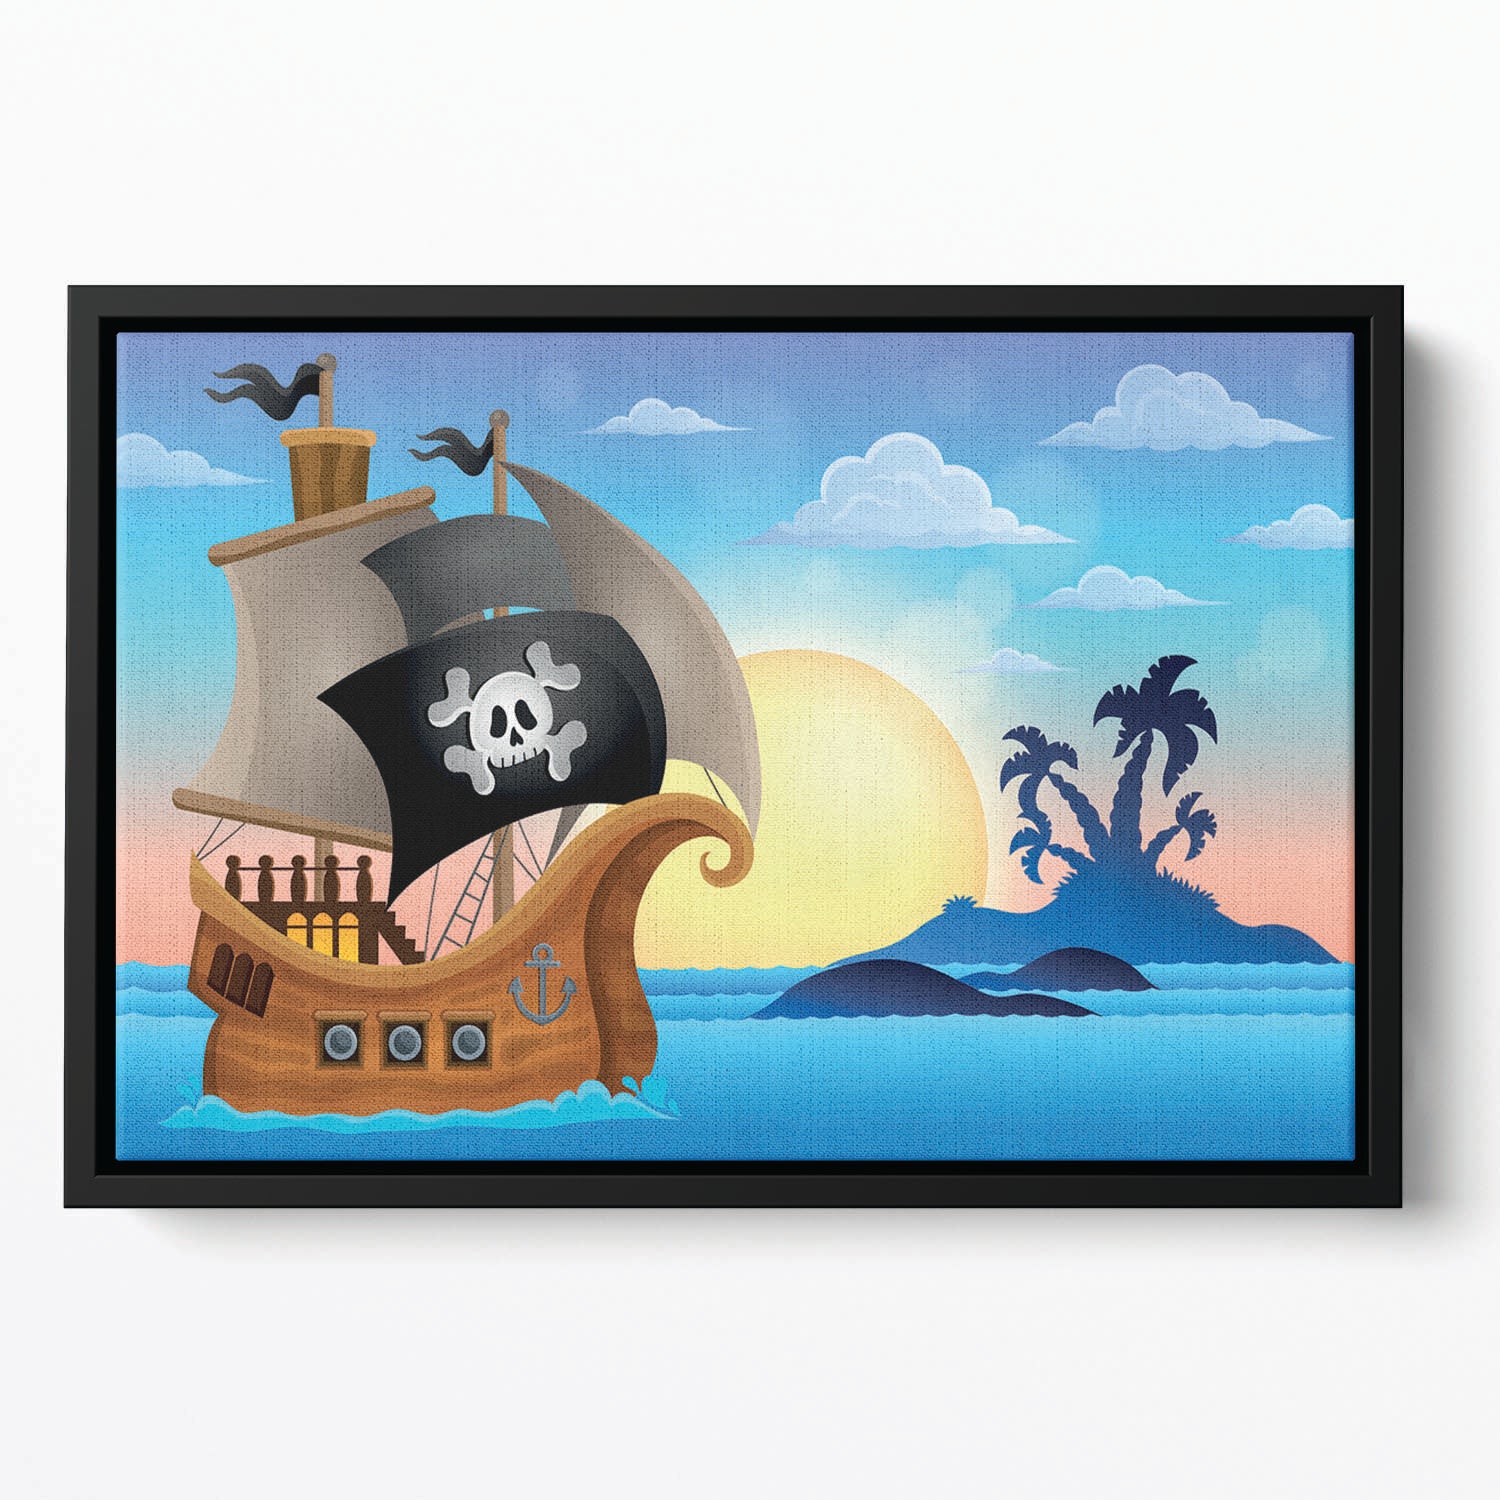 Pirate ship near small island 4 Floating Framed Canvas